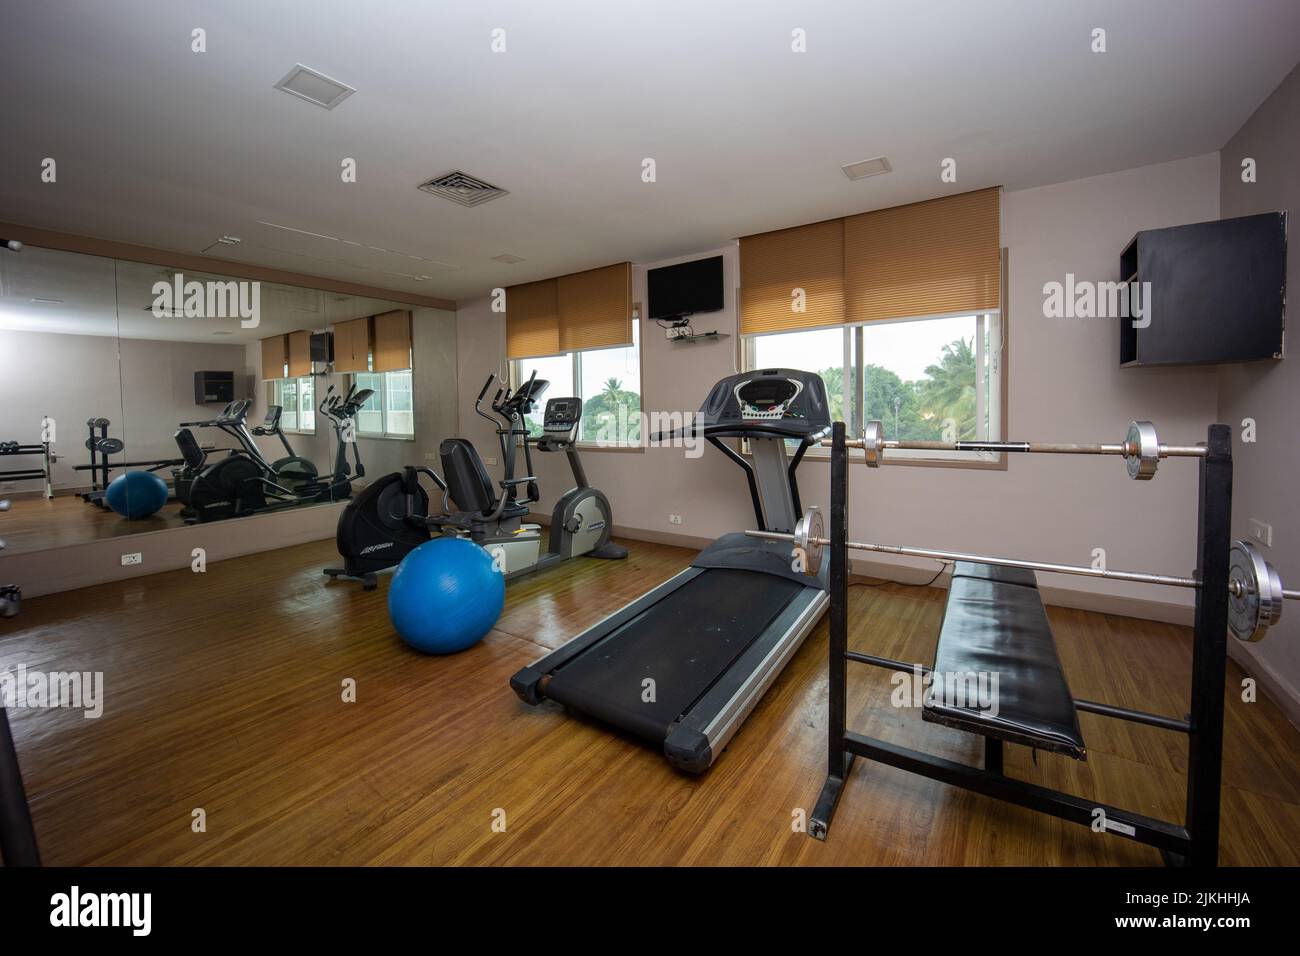 A small gym room with several expensive equipments for training Stock Photo